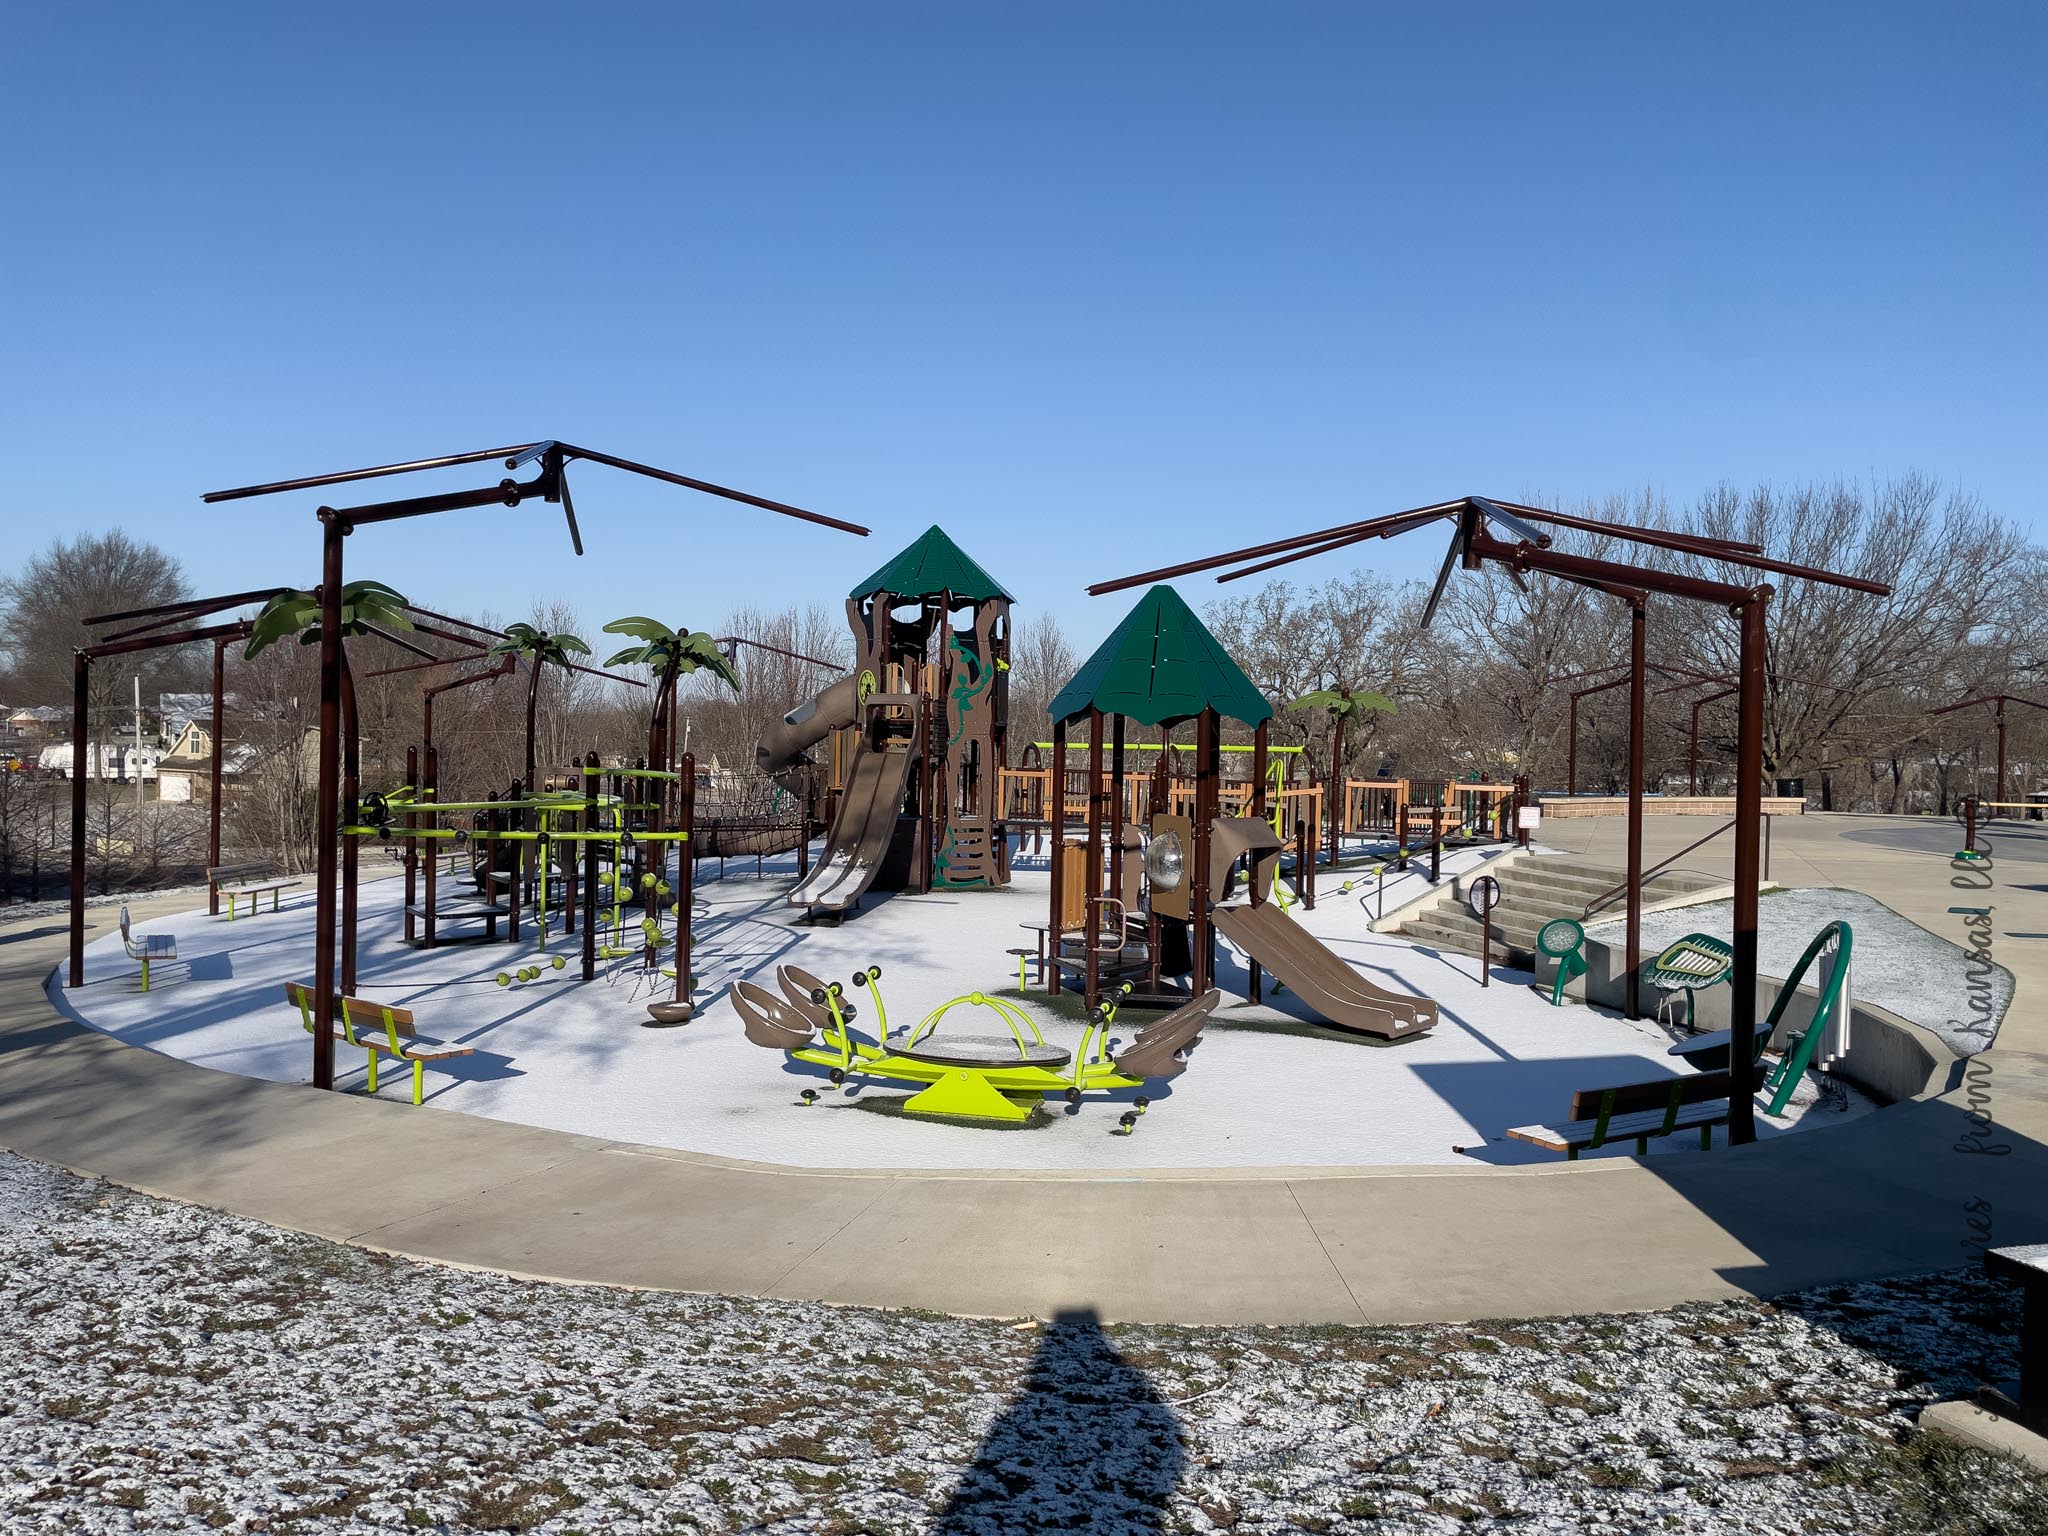 Full on view of the playground in blue springs mo